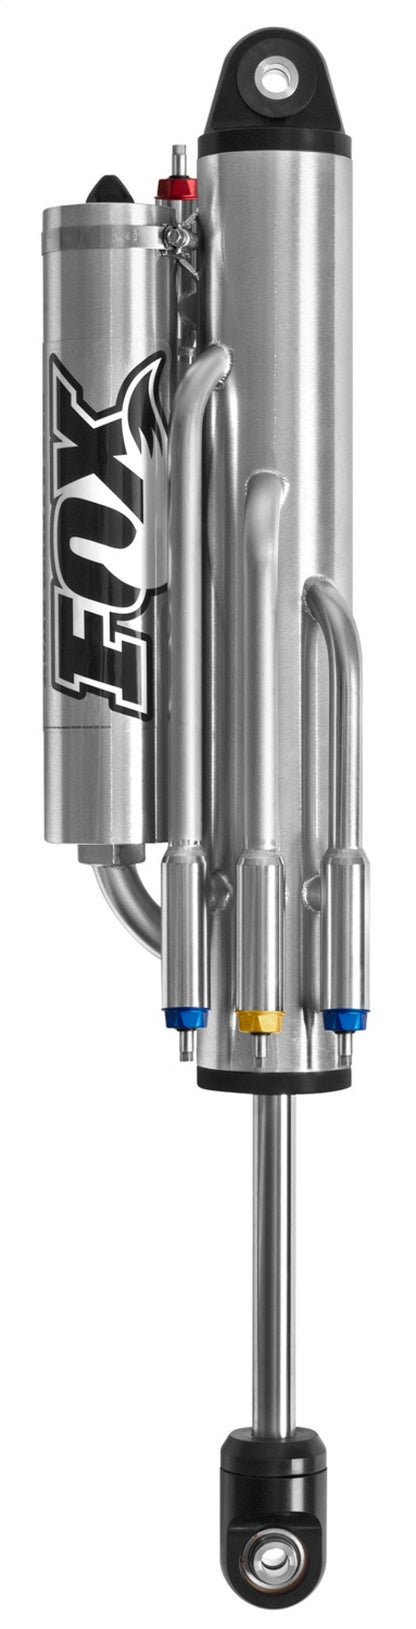 Fox 3.5 Factory Series 16in P/B Res. 5-Tube Bypass (3 Comp/2 Reb) Shock 1in Shft (Cust. Valv) - Blk